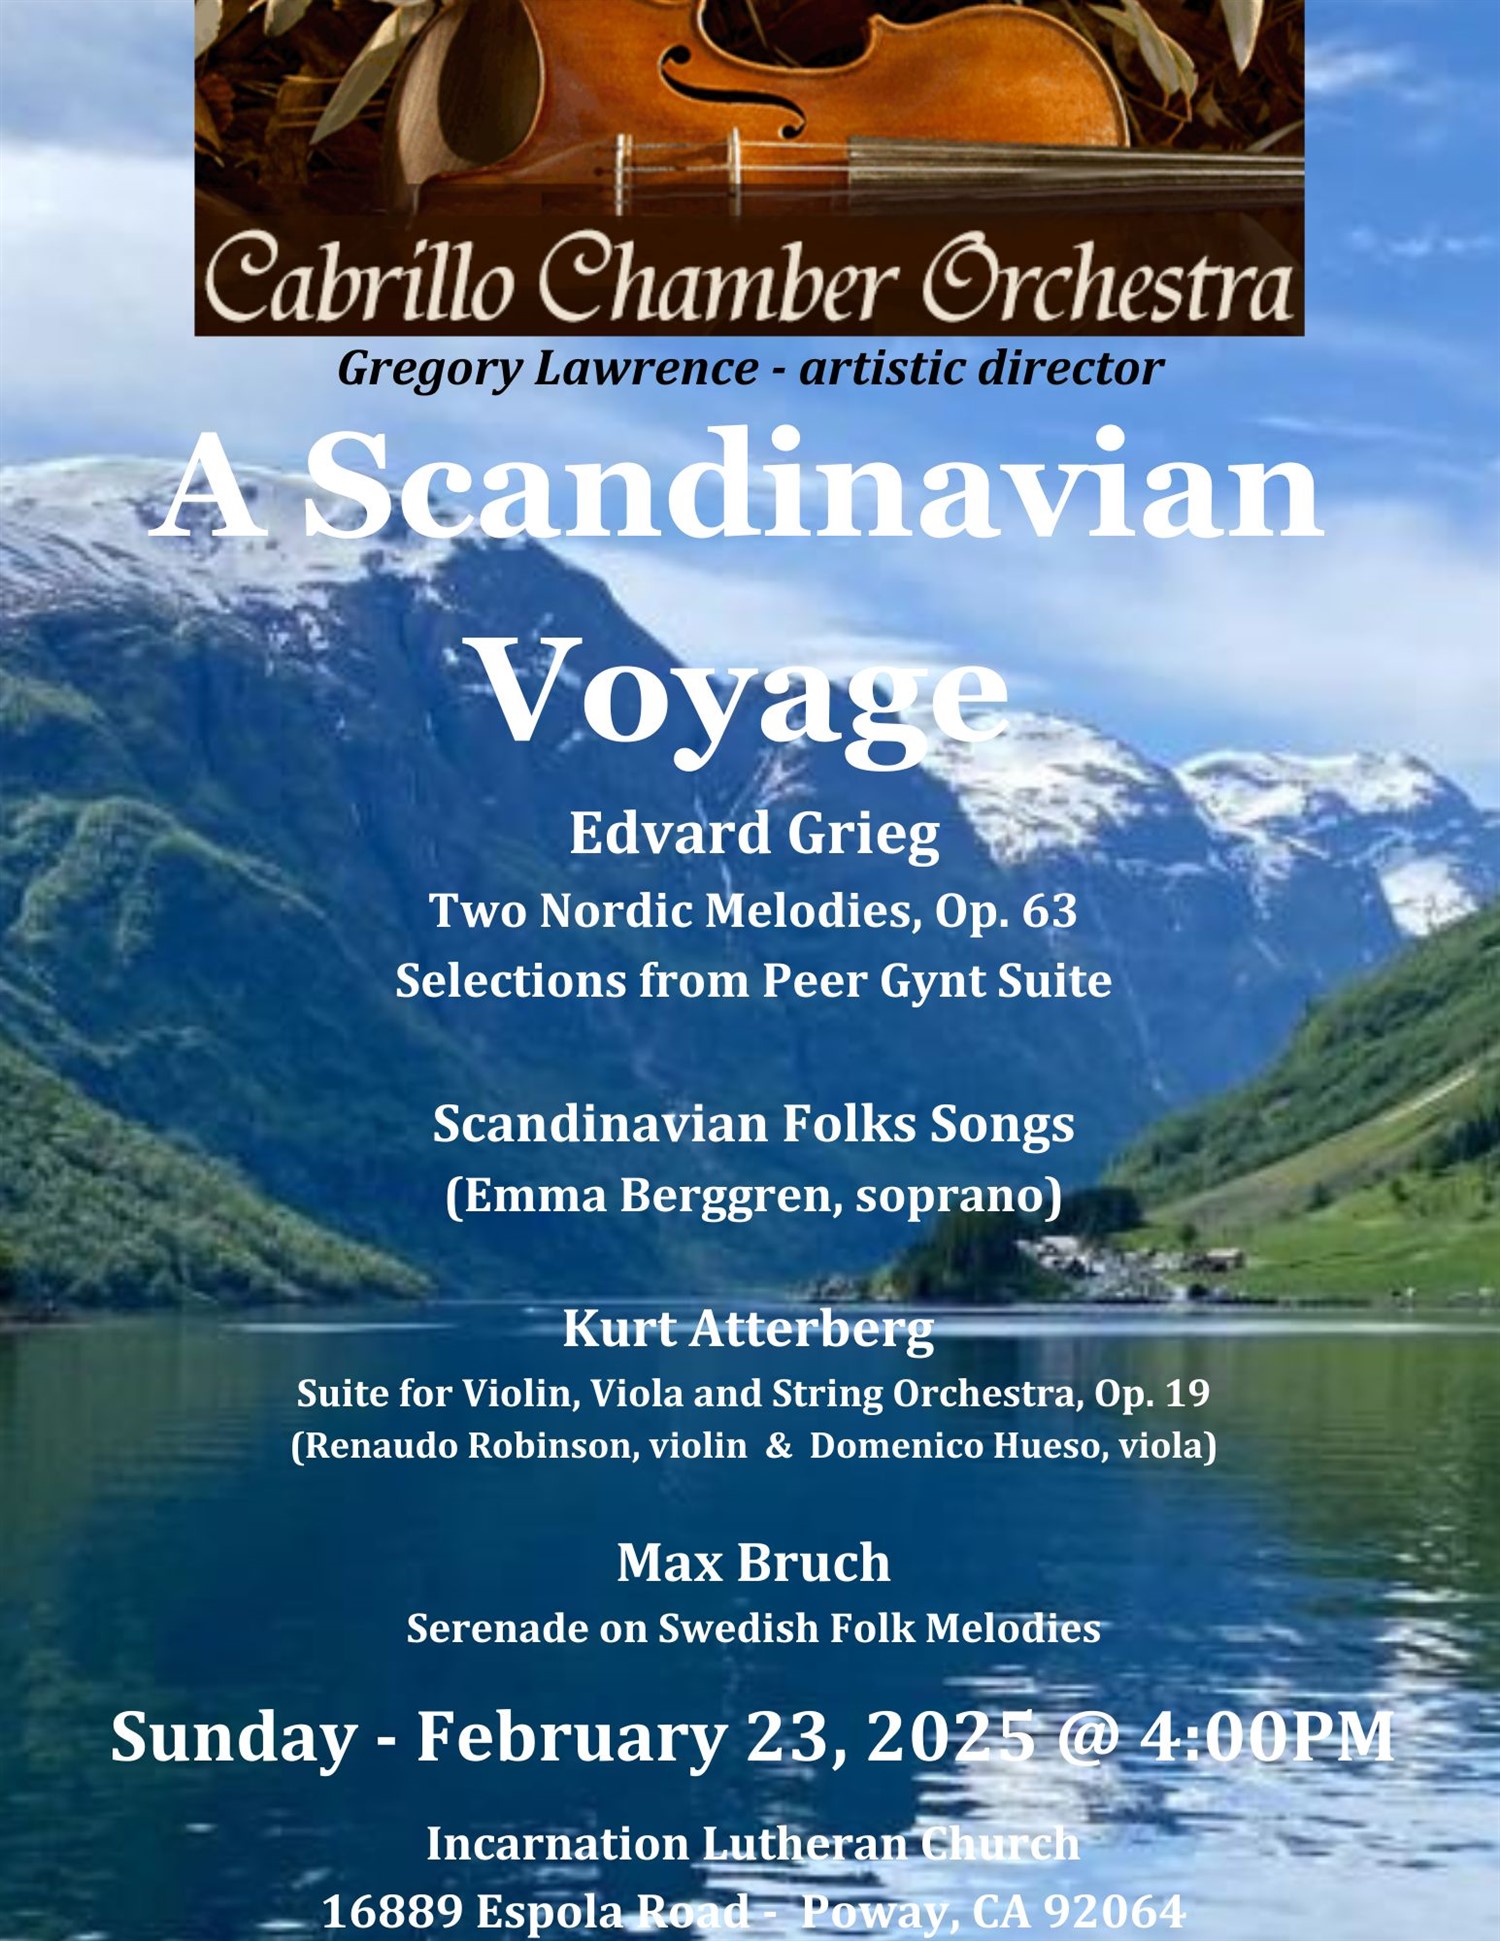 'A Scandinavian Voyage'  on Feb 23, 04:00@Incarnation Lutheran Church - Buy tickets and Get information on Cabrillo Chamber Orchestra 